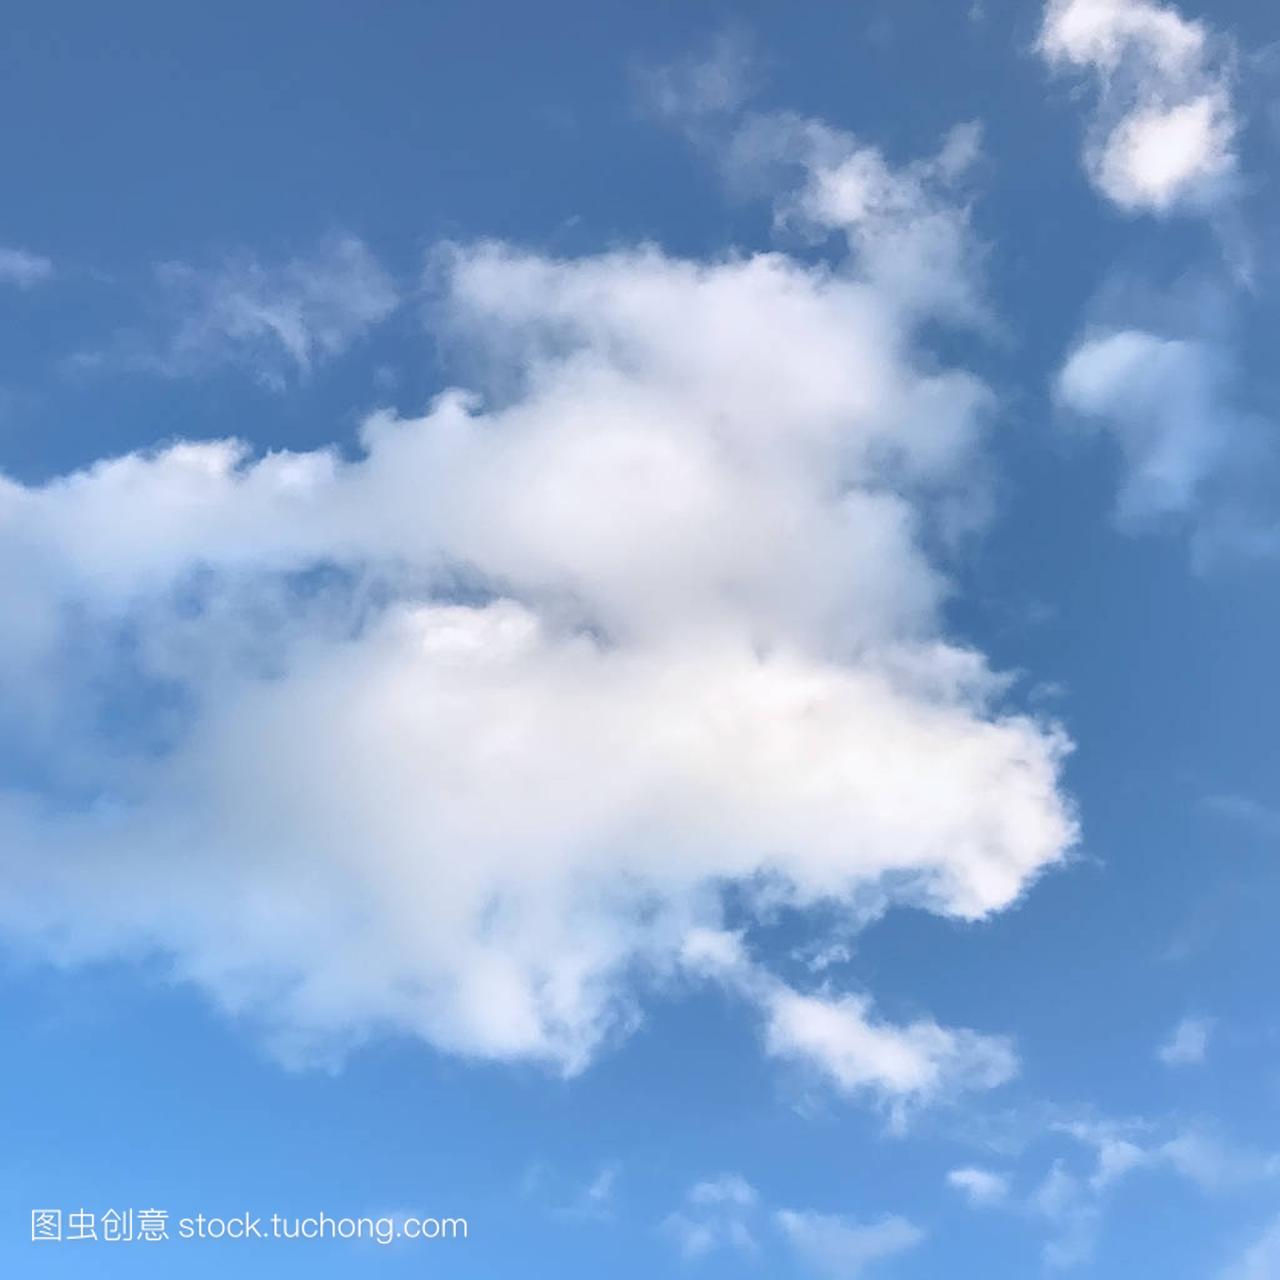 Innocent blue sky with white fluffy clouds